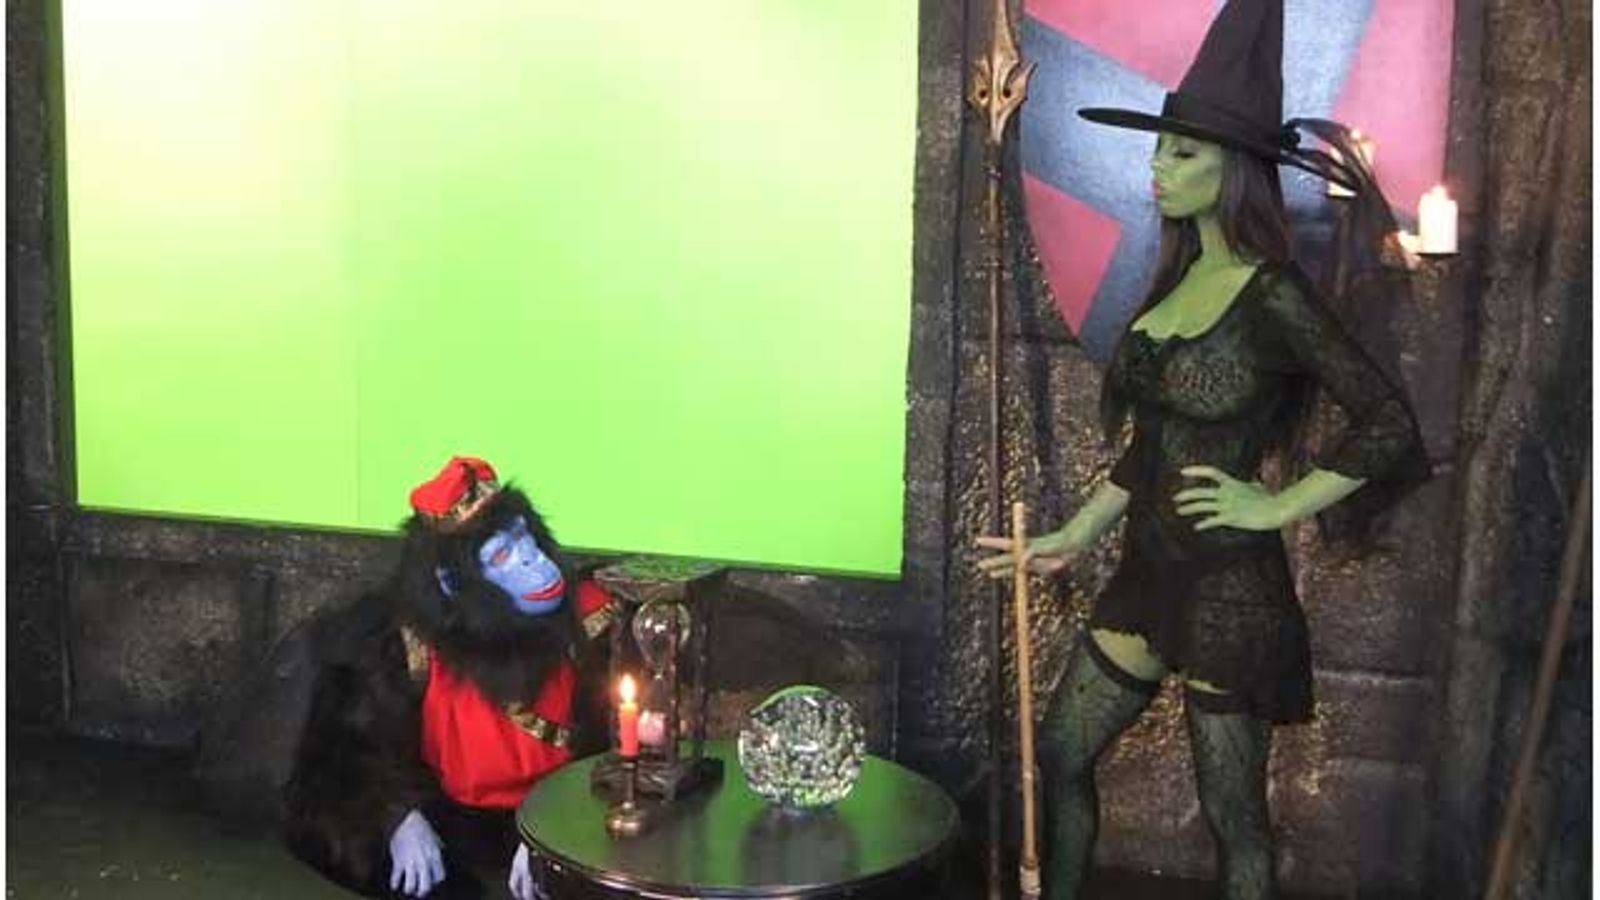 Finally, See Brandy Aniston as the Wicked Witch This Week